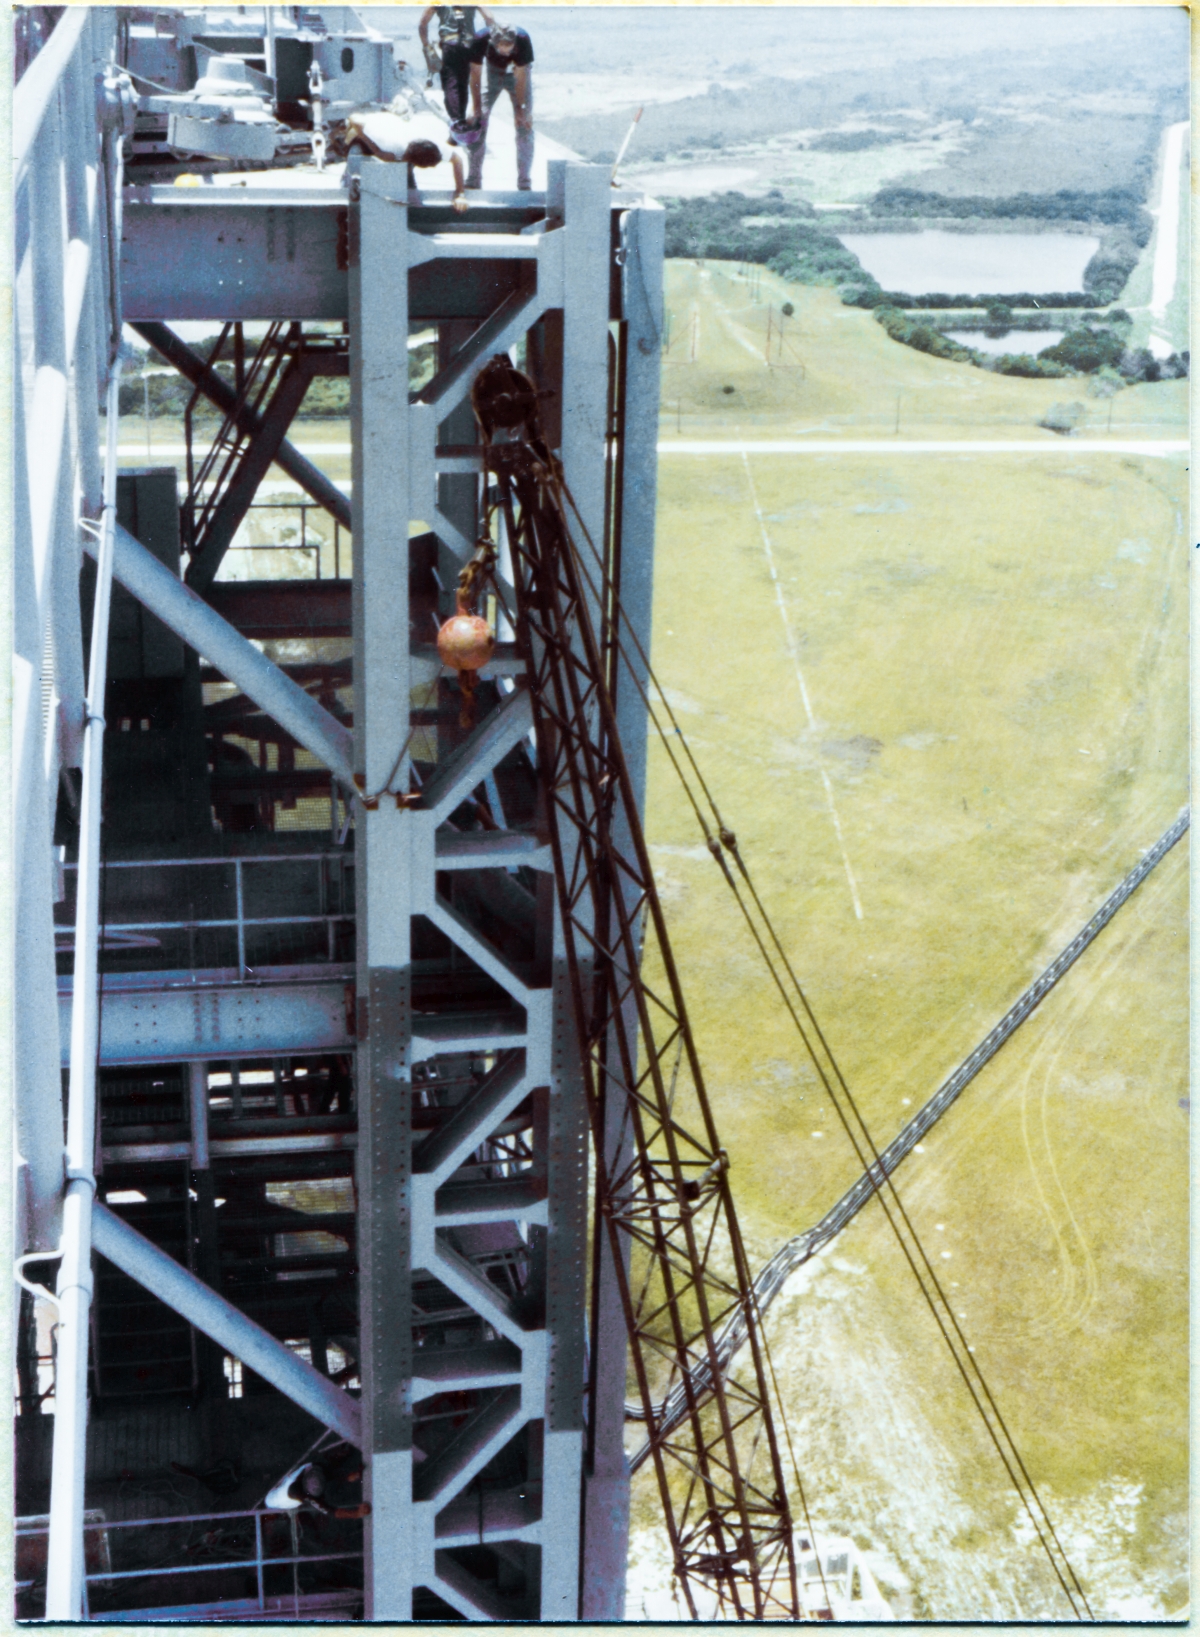 Image 084. Wade Ivey (dark blue shirt, holding blue hardhat in his right hand), owner of Ivey's Steel Erectors, stands on the checkerplate which defines the top of the Fixed Service Structure at elevation 300'-0”, in this image taken from the far end of the Hammerhead Crane Boom at Space Shuttle Launch Complex 39-B, Kennedy Space Center, Florida, and leans out past the edge of the checkerplate in order to see precisely where his team of Union Ironworkers from Local 808 have positioned the GOX Arm Hinges Support Strongback. The Strongback is not quite at its final location, where it will be welded and bolted to the Perimeter Framing of the FSS, and great care must be taken using a mobile crane with just under 250 feet of boom, maneuvering horizontally and vertically to sub-eighth-inch tolerance, in conjunction with rigging attached directly to the FSS itself, to get the Strongback EXACTLY where it belongs, where it will be fastened immovably in place, thus irrevocably locating where the GOX Arm itself will be positioned for its servicing work at the Gaseous Oxygen Vent on top of the Space Shuttle's External Tank. This is exceedingly close-tolerance work, and it takes the best in the business to execute it, and Wade Ivey along with his whole workforce of Union Ironworkers were the best in the business. Photo by James MacLaren.